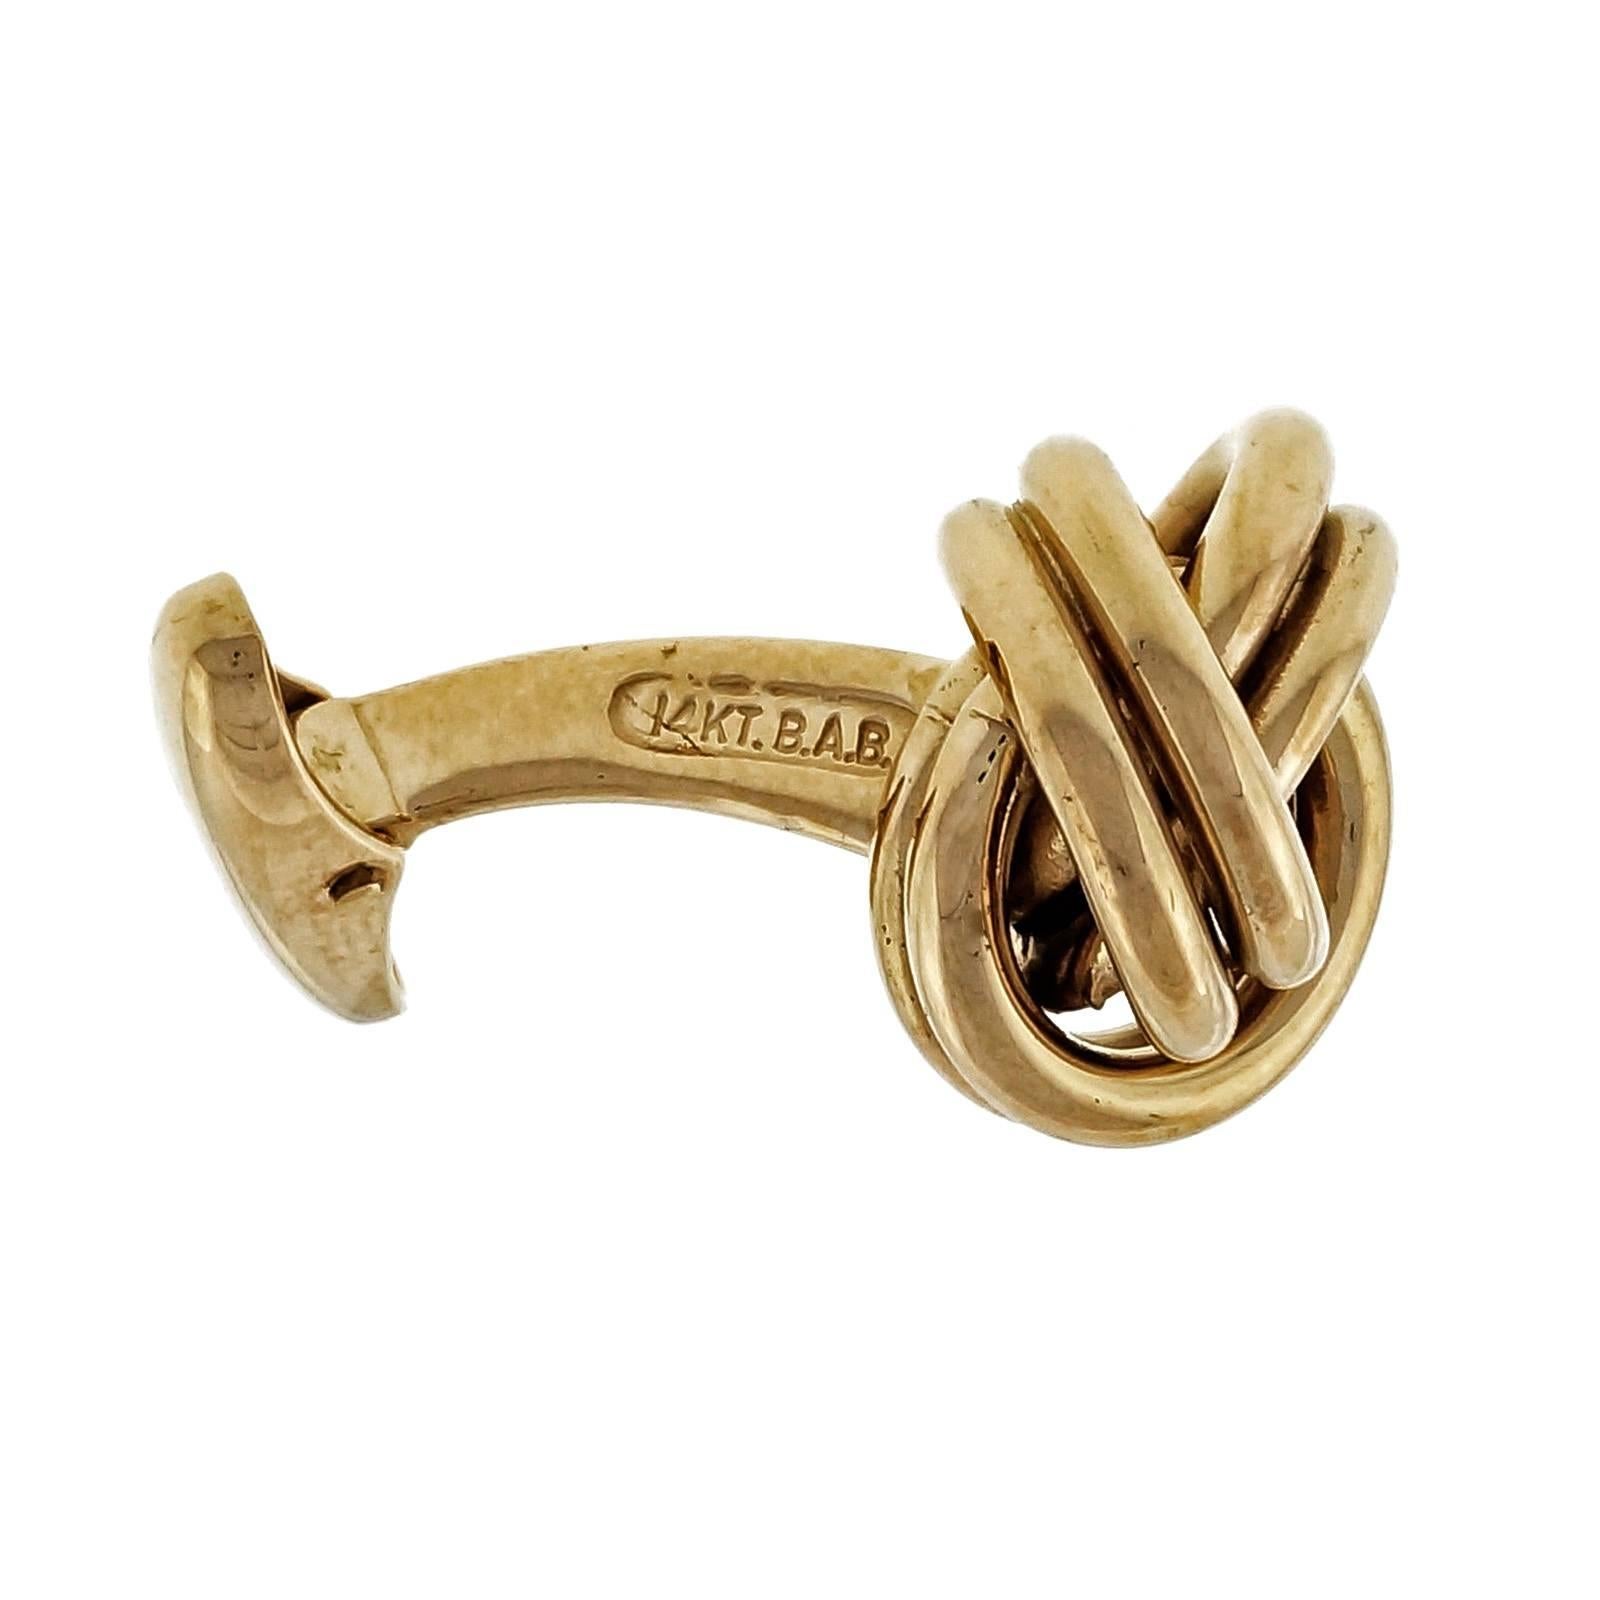 B. A. Ballou clip back knot 14 yellow gold cufflinks.

14k yellow gold
Tested and stamped: 14k
Hallmark: BAB
9.4 grams
Top to bottom: 14.48mm or .57 inch
Width: 15.12mm or .59 inch
Depth: 8.92mm
